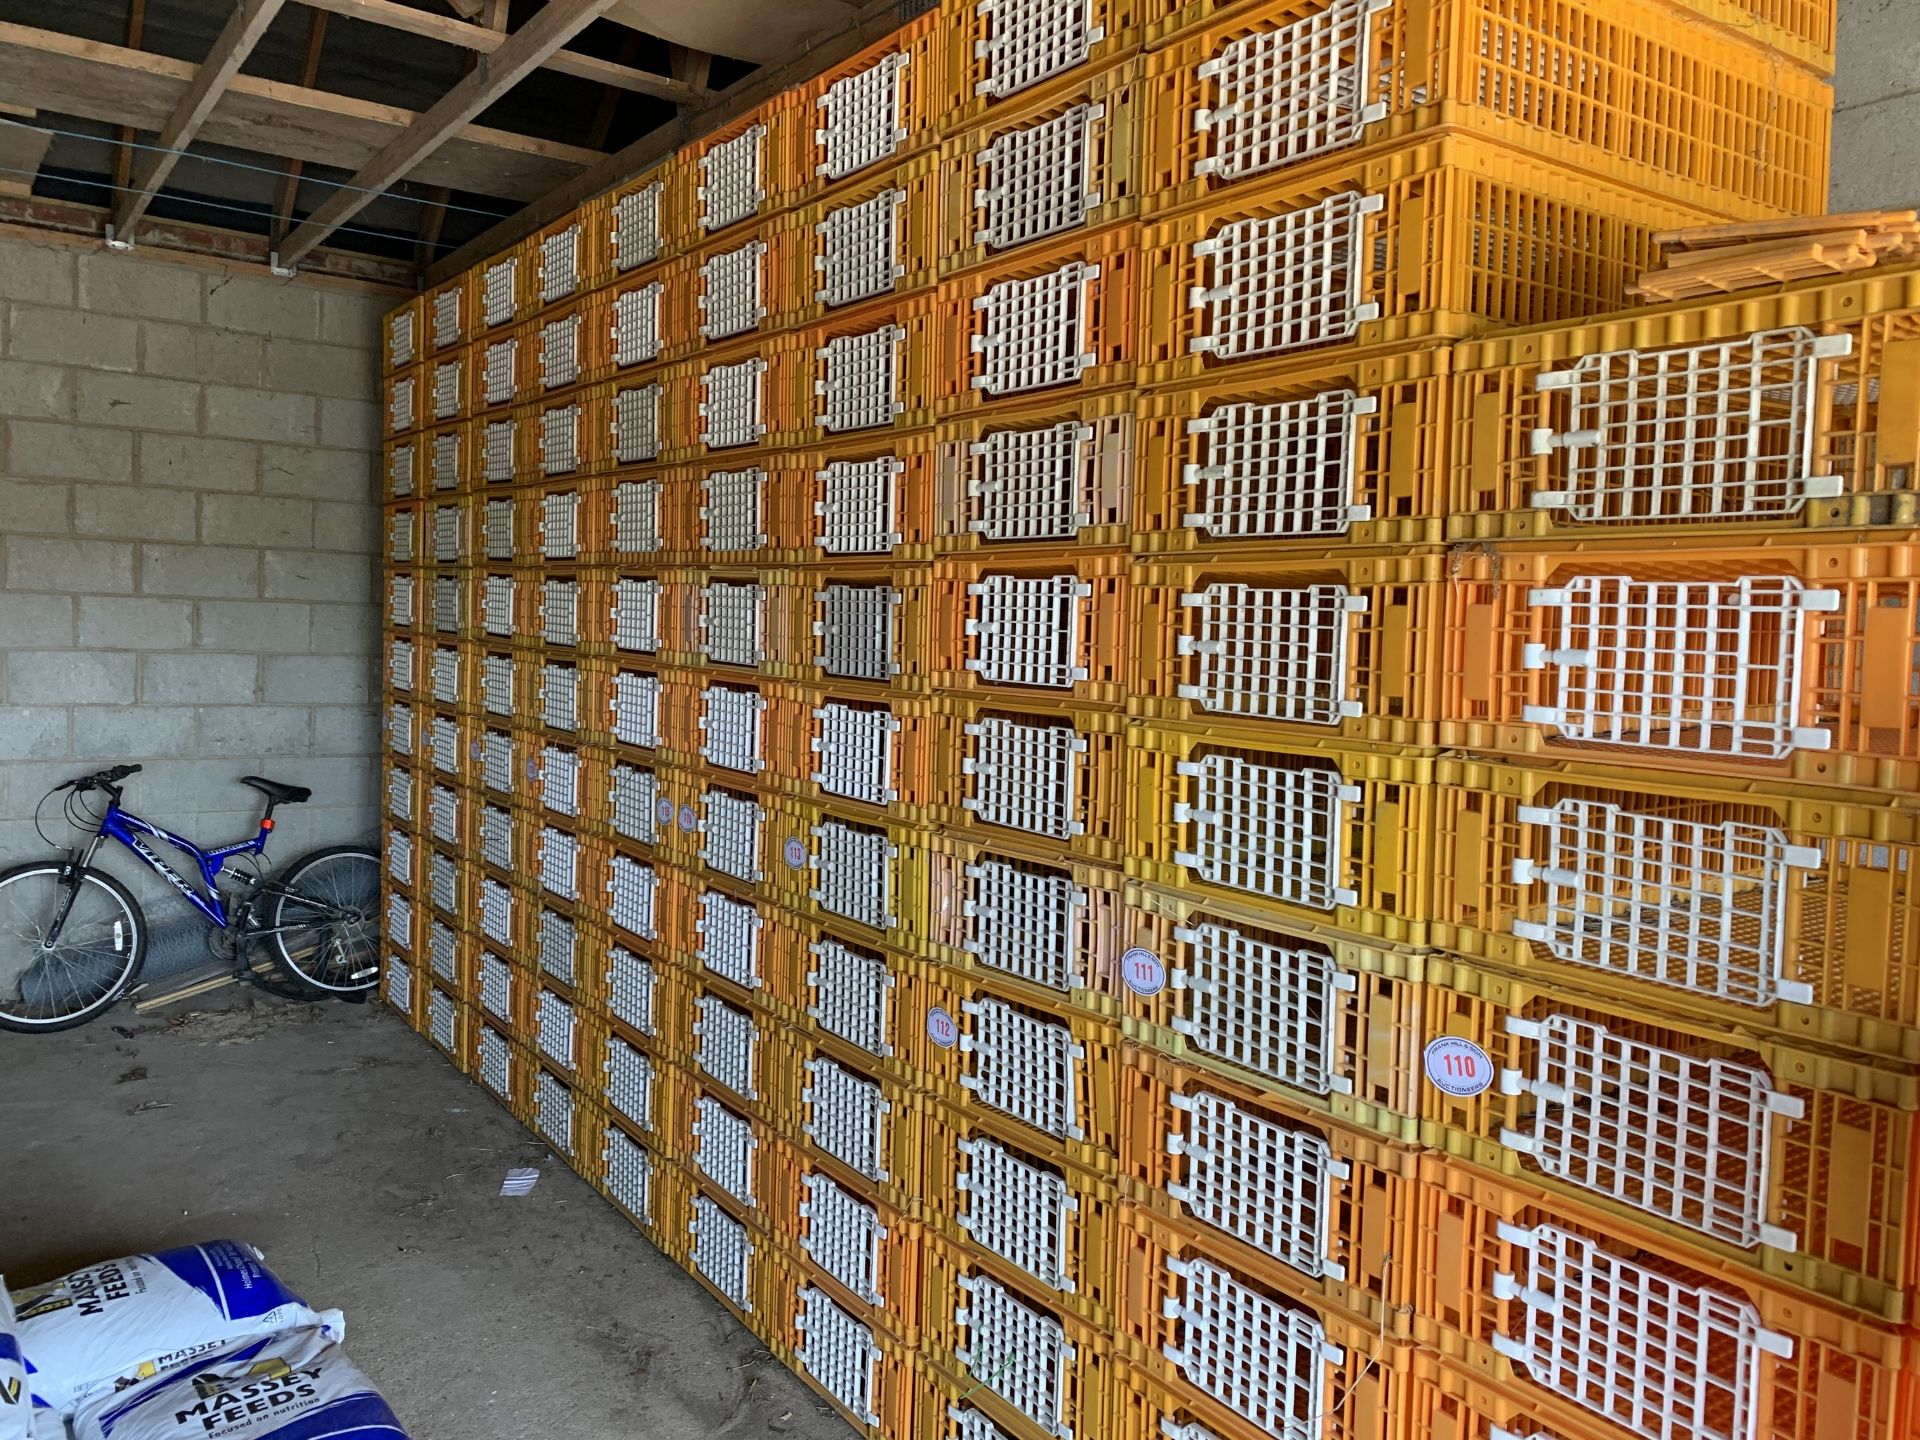 11 poultry crates